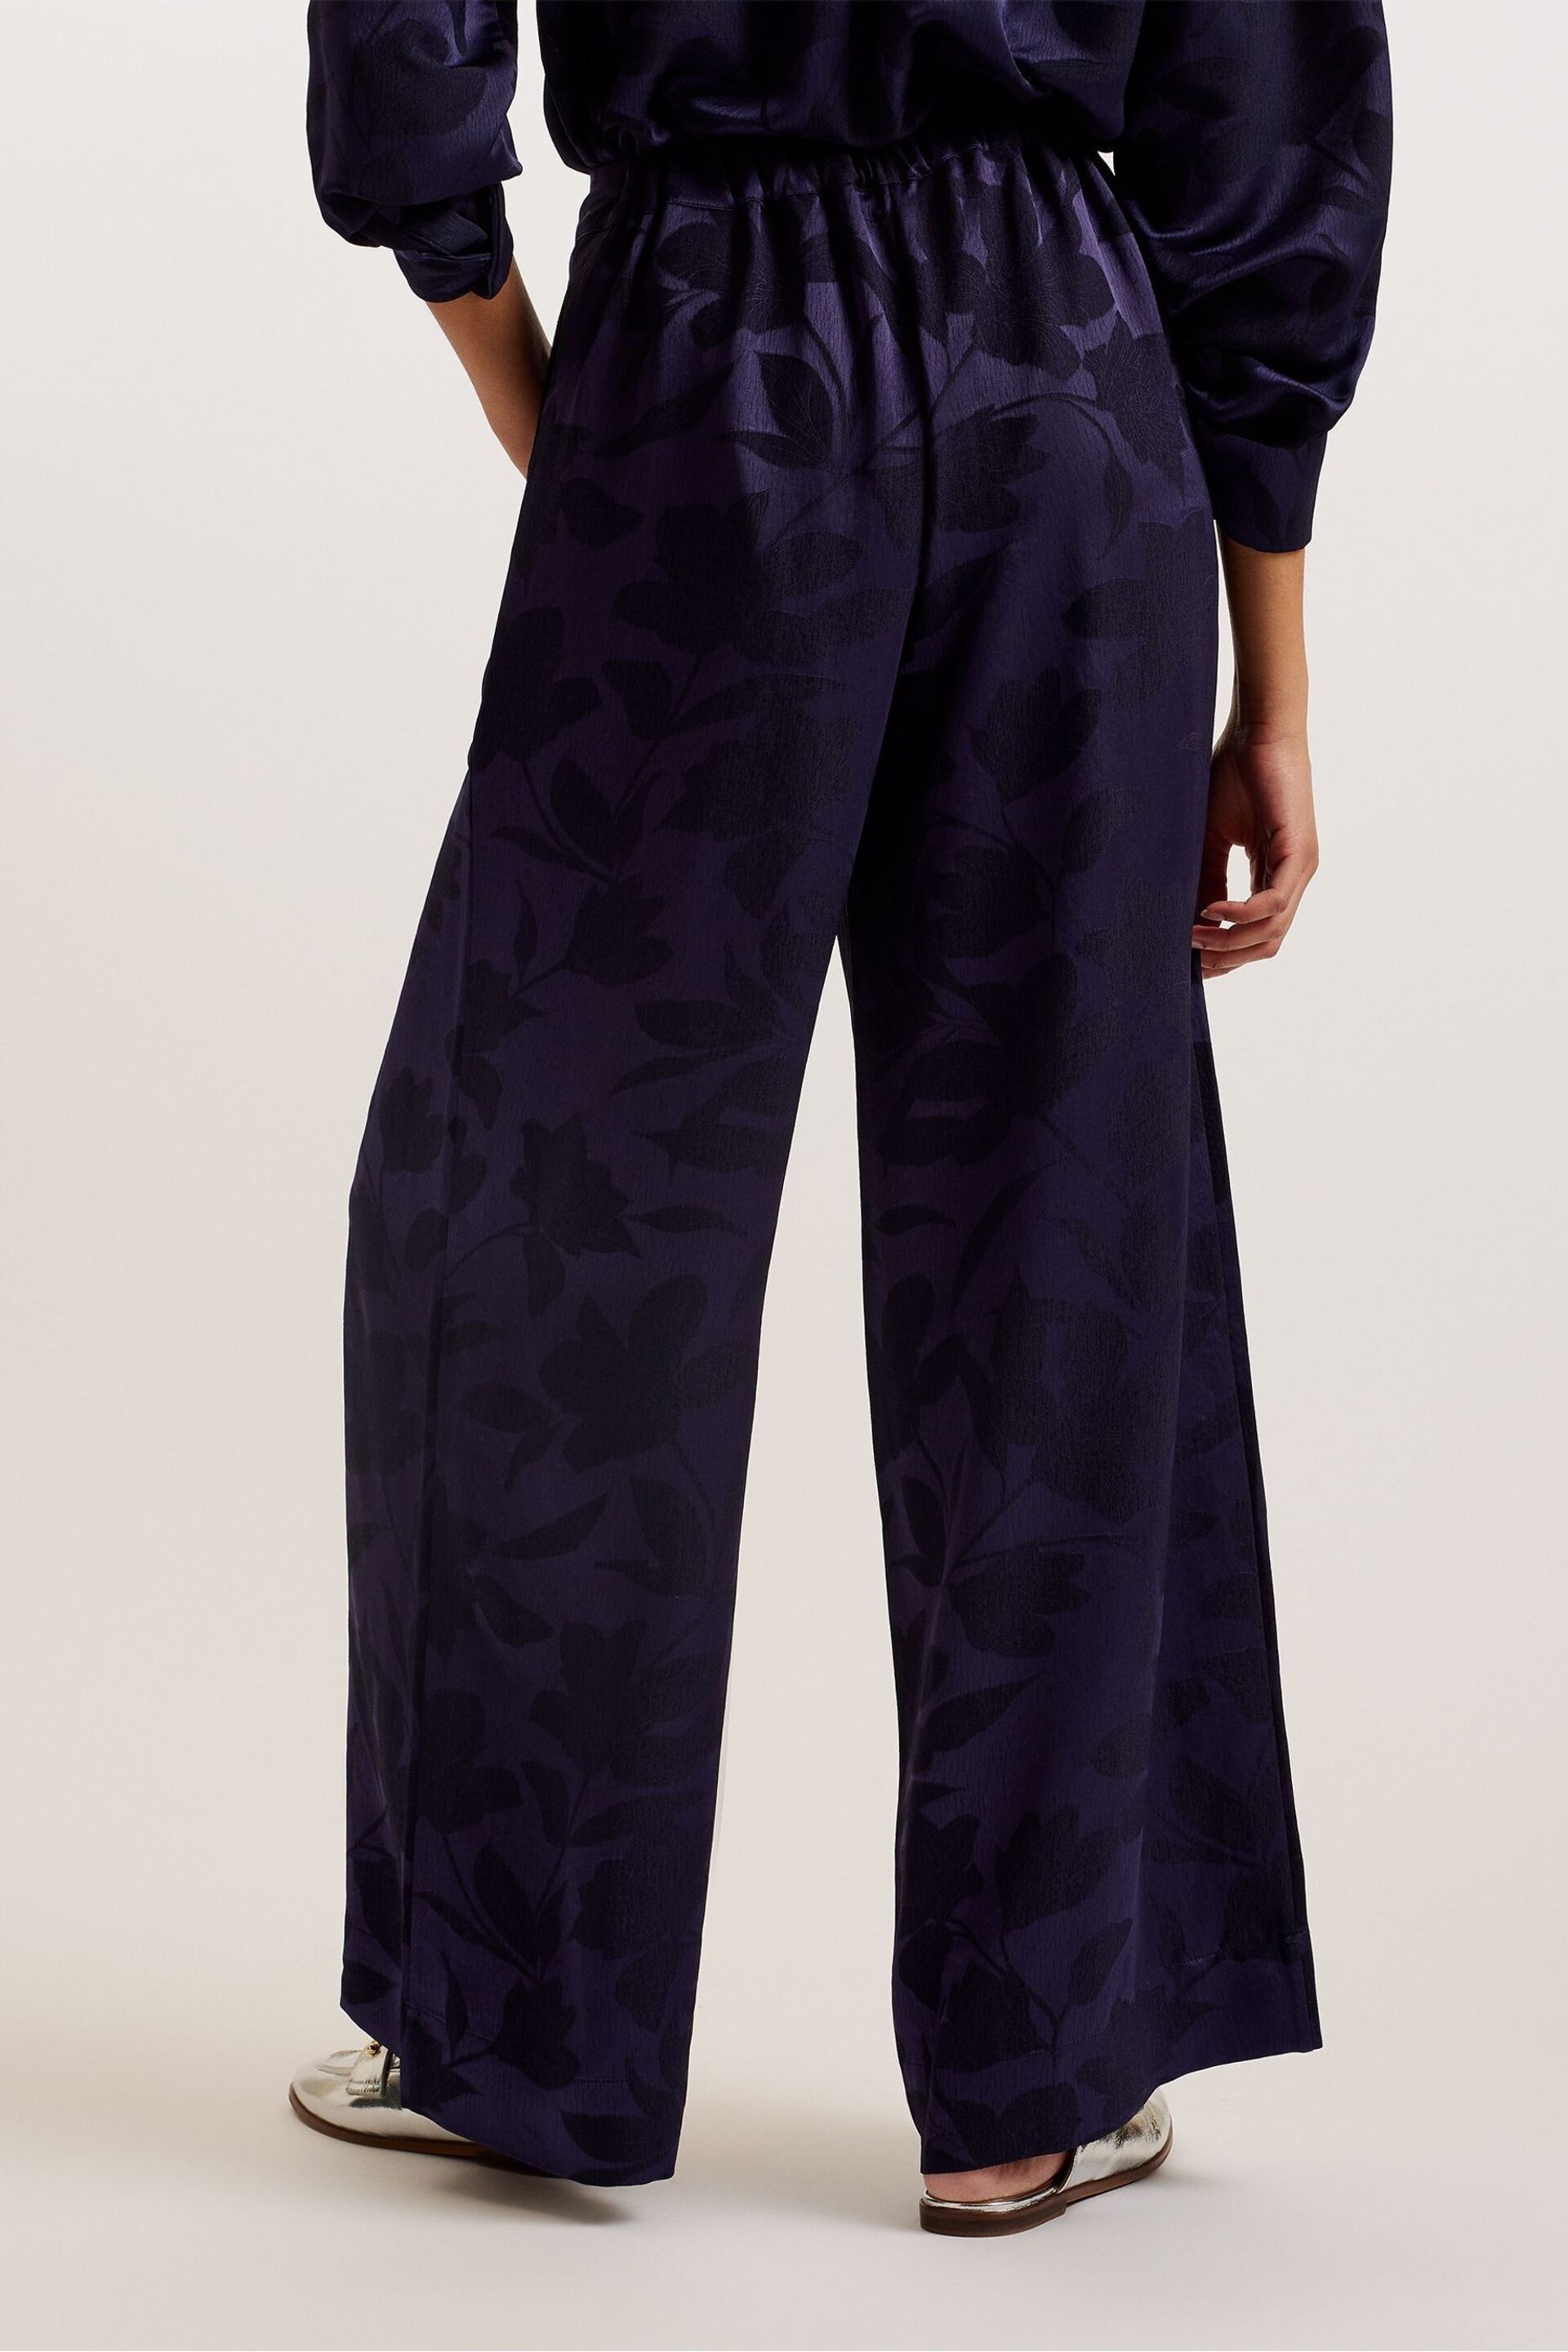 Ted Baker Blue Maurah Wide Leg Trousers - Image 3 of 5